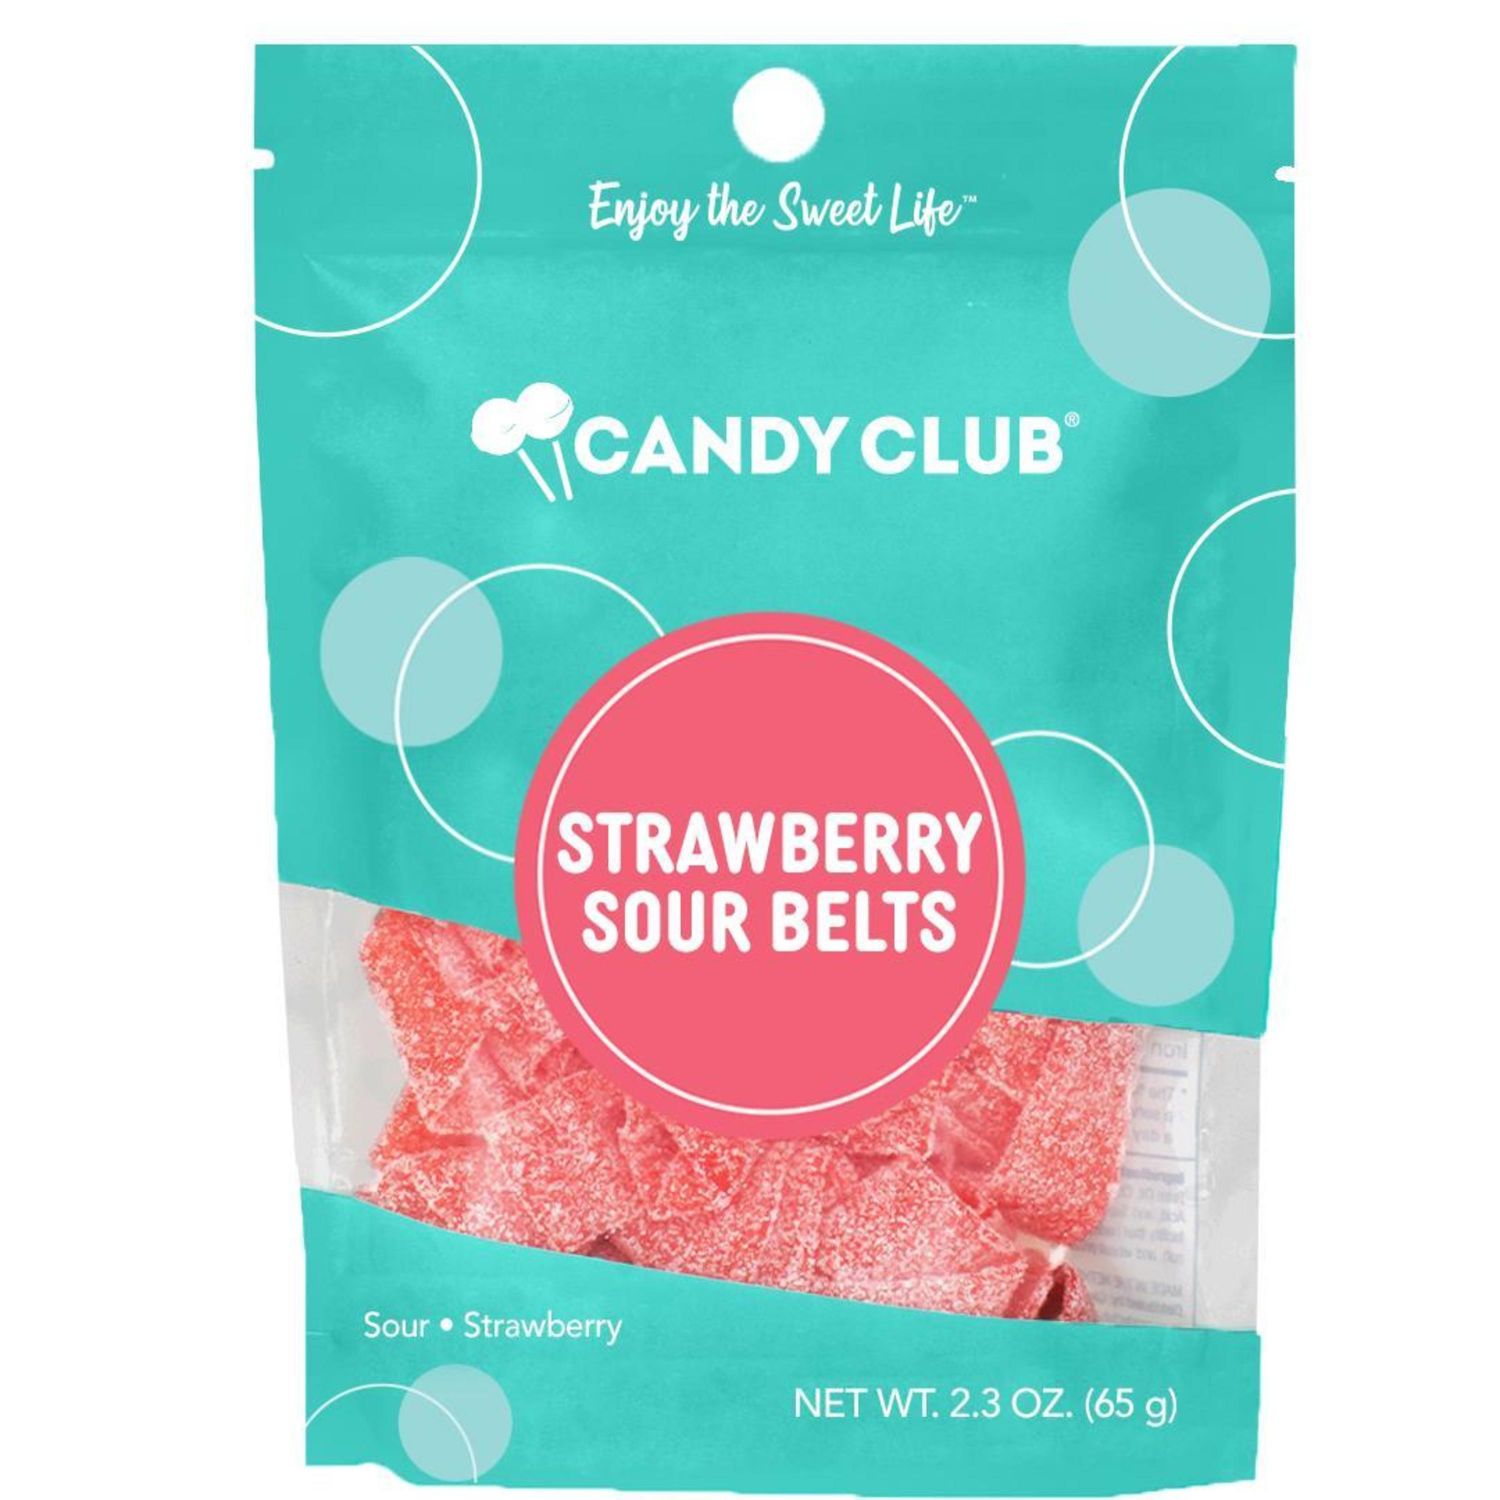 Candy Club Strawberry Sour belts BAG